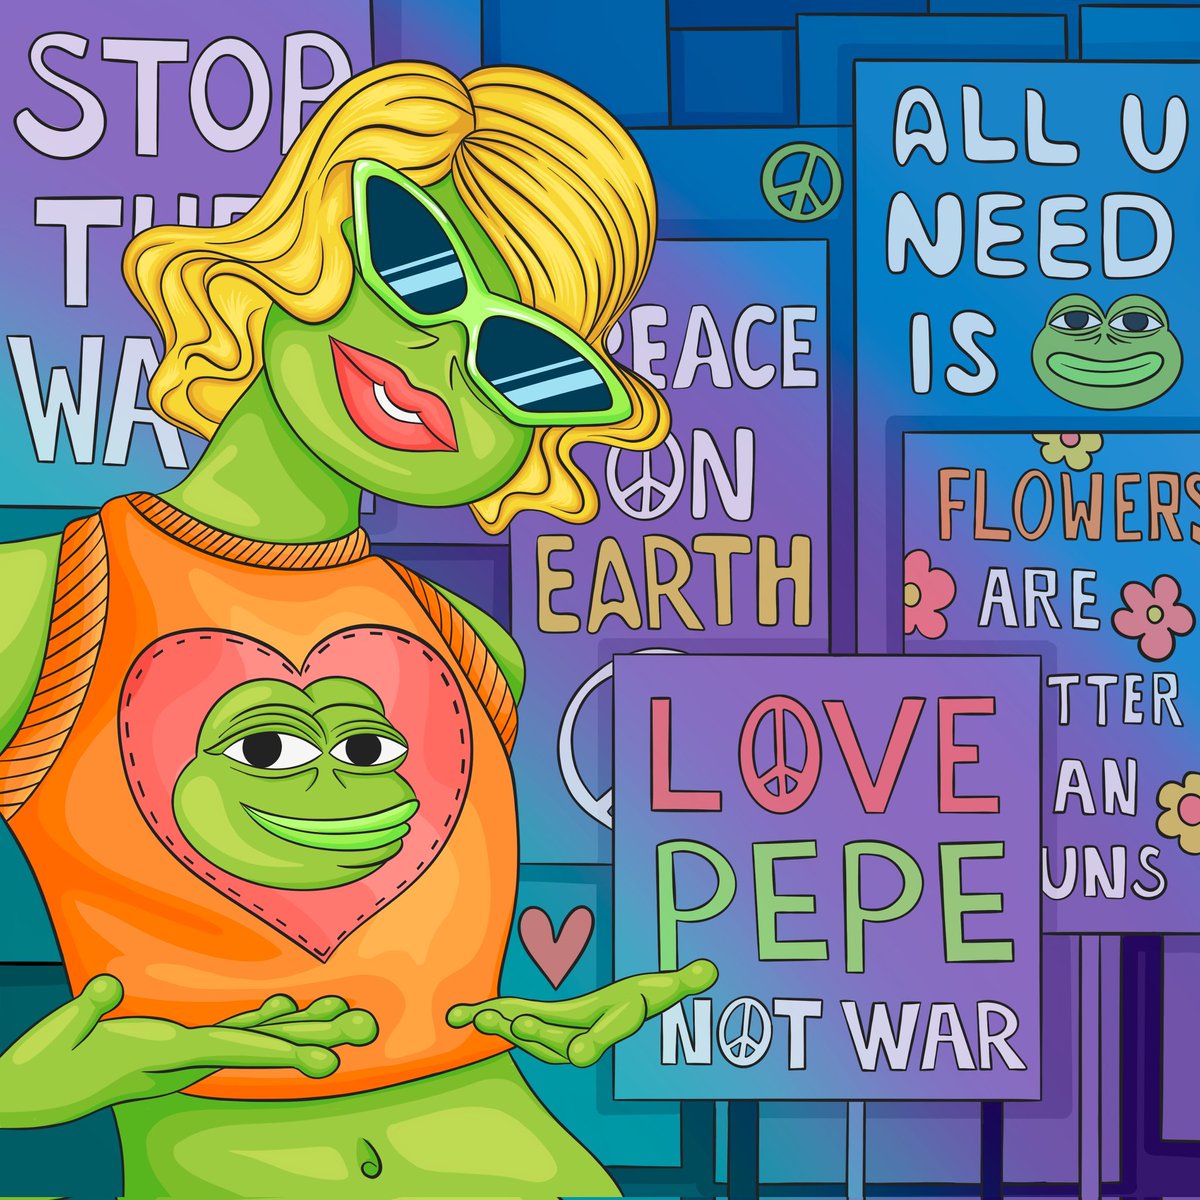 In case you forgot:

#PEPEISLOVE $PEPE